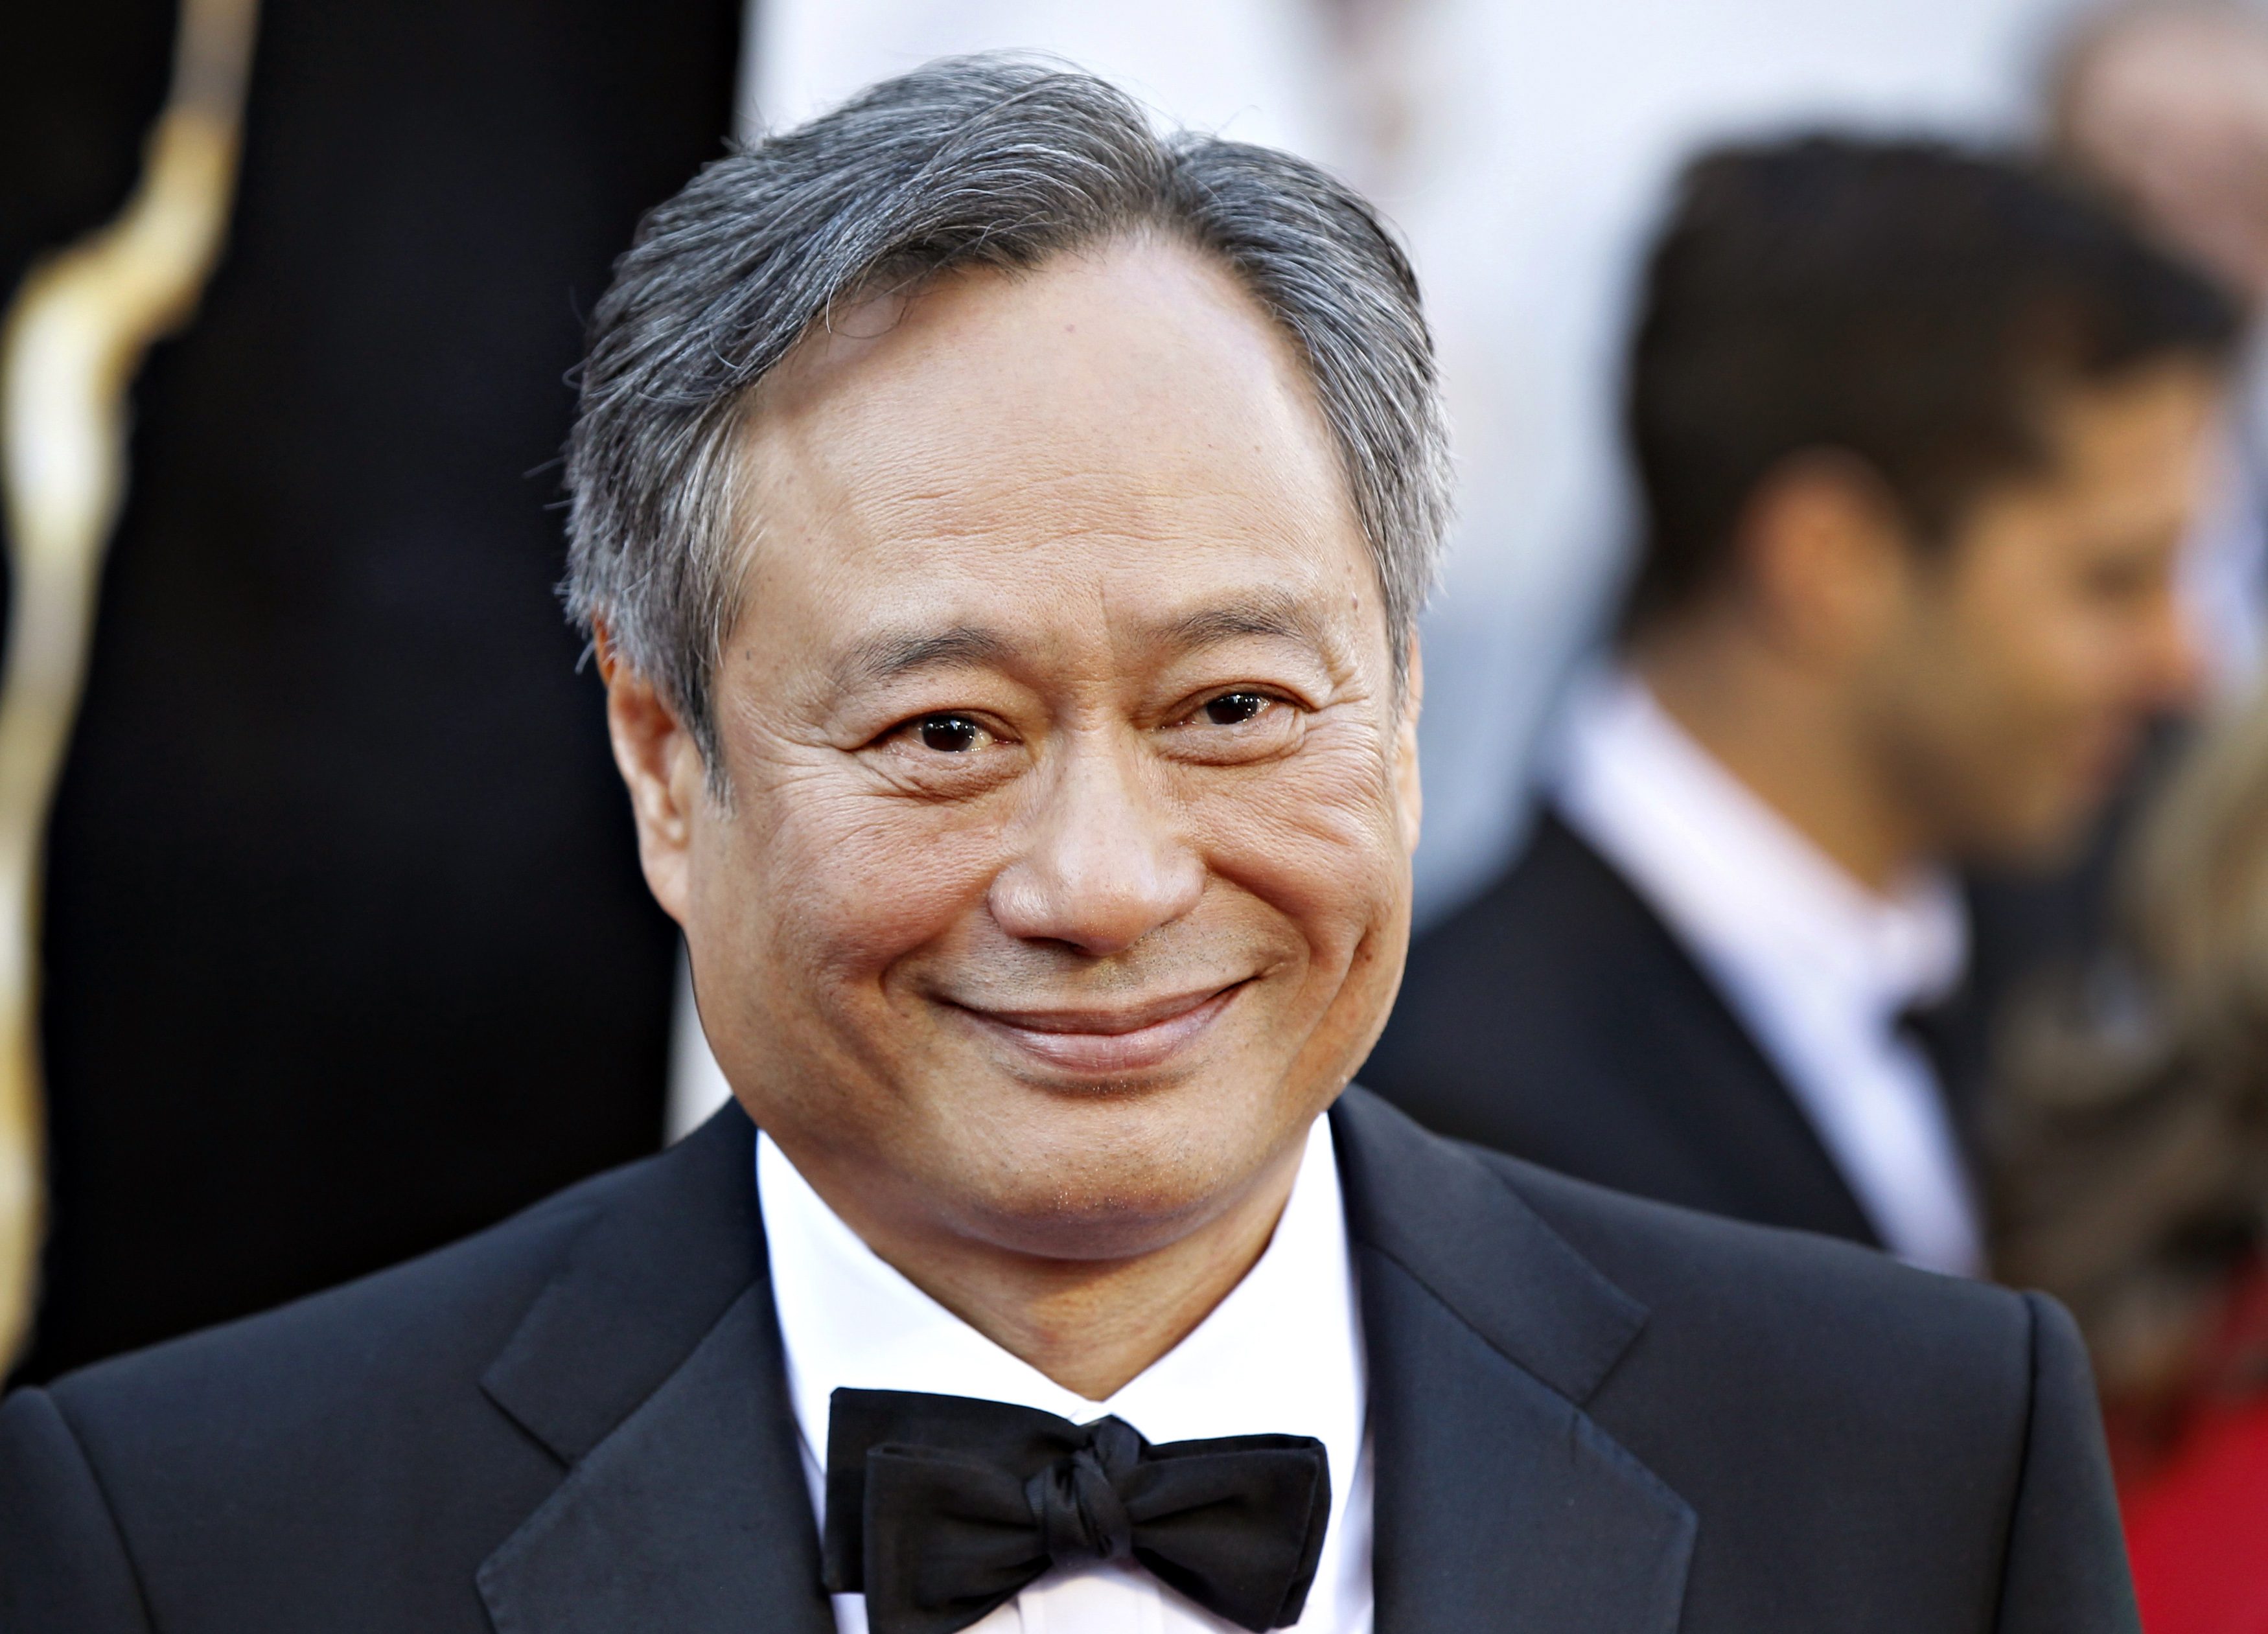 Ang Lee, best director nominee for his film "Life of Pi", arrives at the 85th Academy Awards in Hollywood